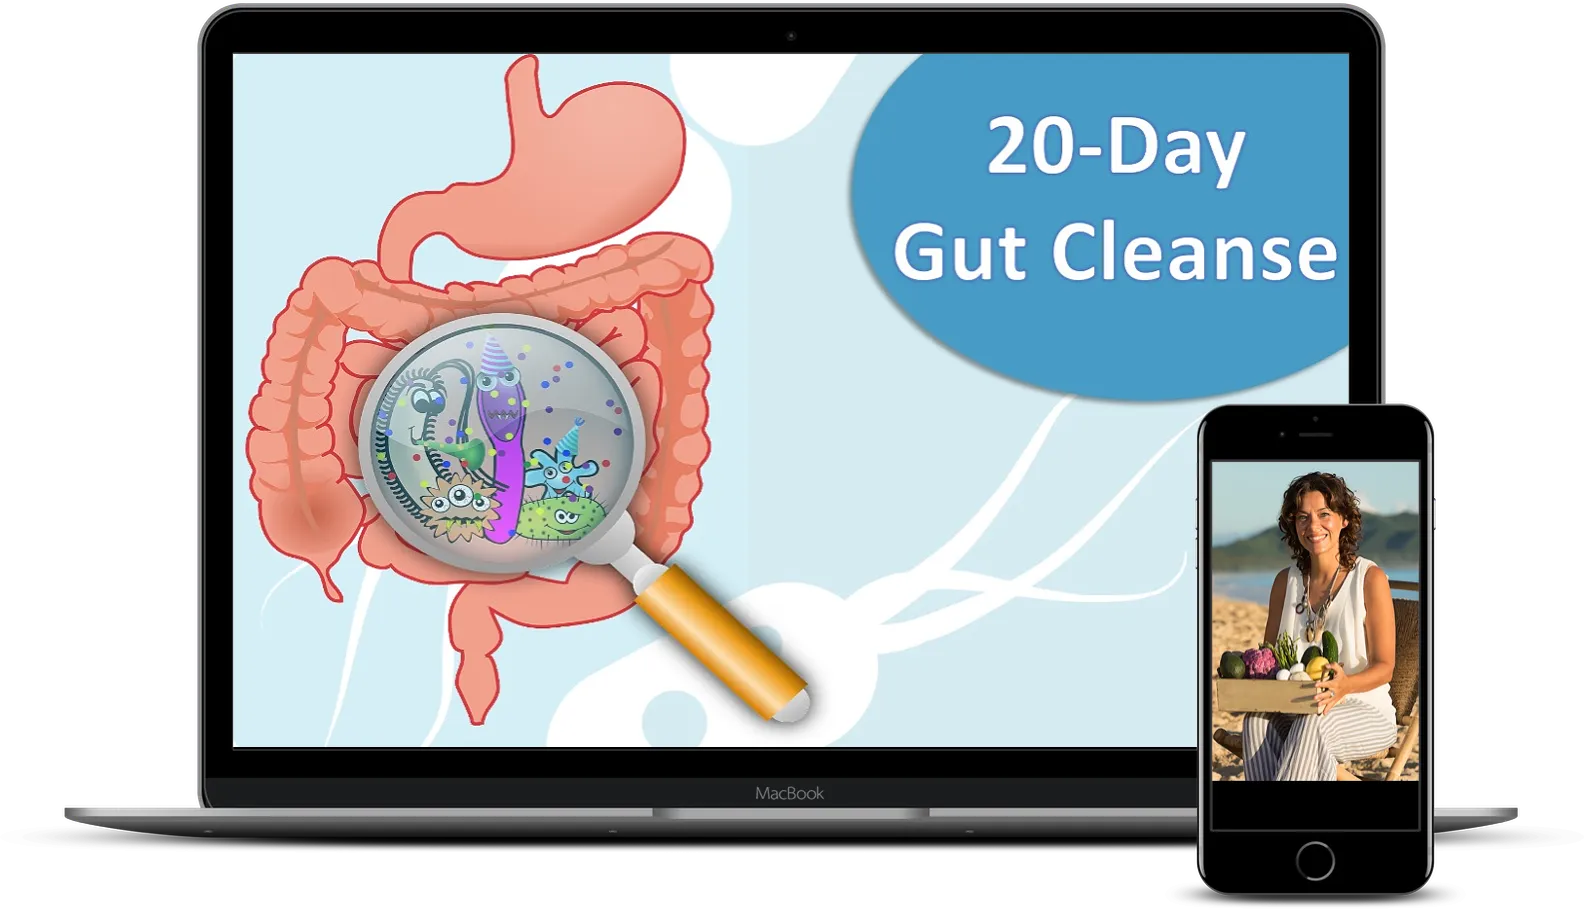 20-Day Gut Cleanse